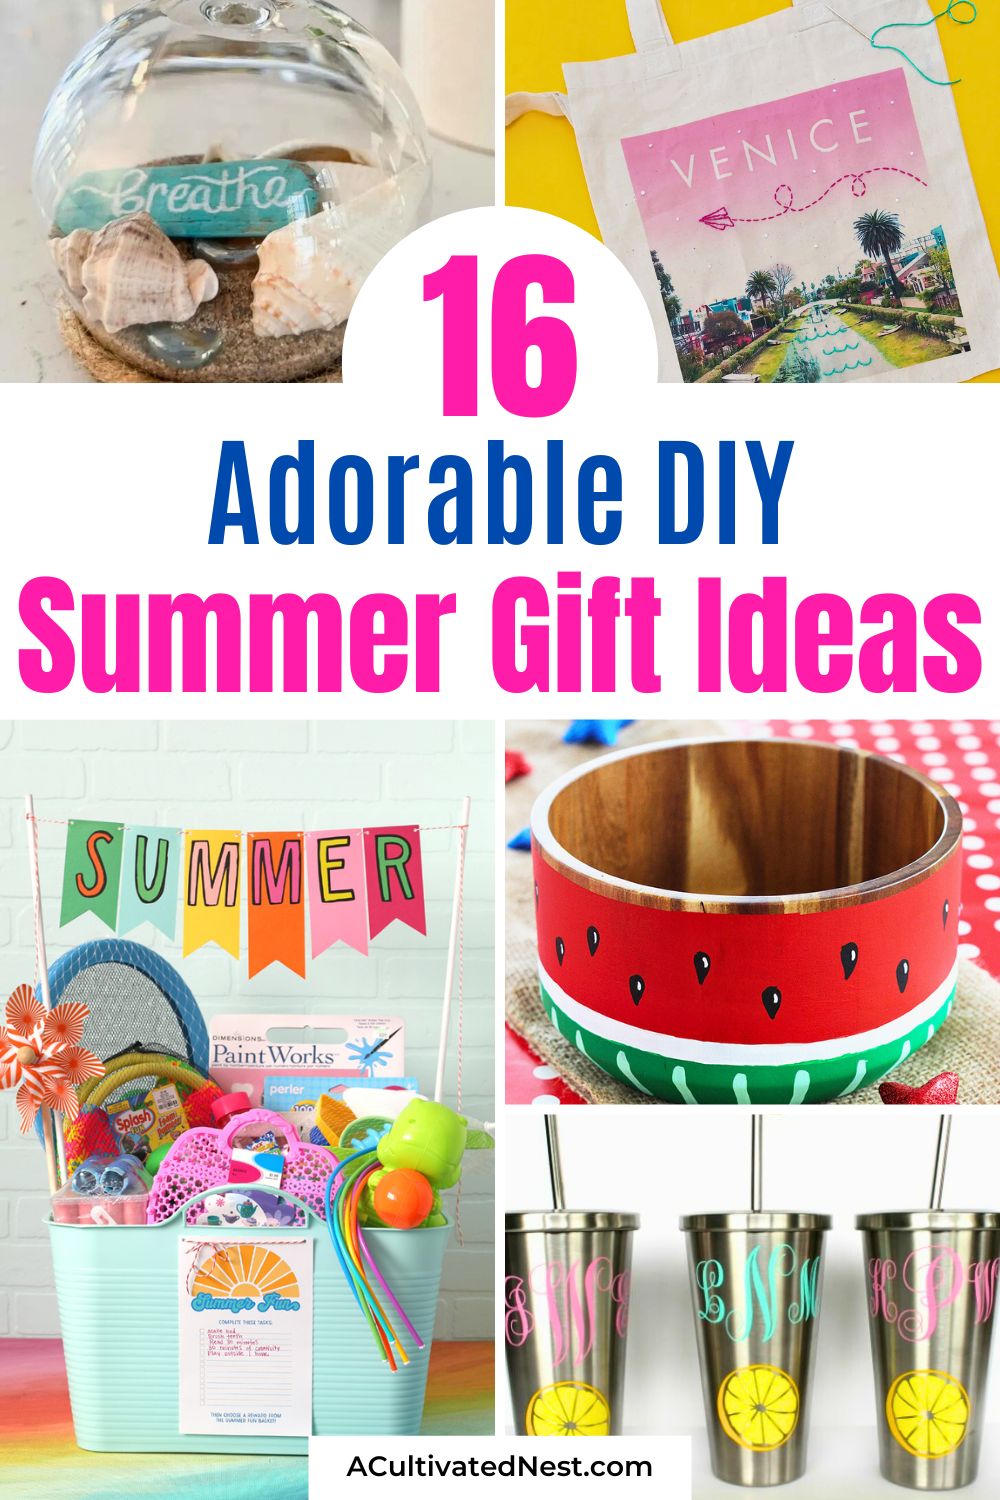 16 Adorable DIY Summer Gift Ideas- Check out cute and creative DIY summer gift ideas that will bring joy to your loved ones. Easy, fun, and perfect for summer! | #SummerDIY #GiftGiving #CraftIdeas #DIYGifts #ACultivatedNest